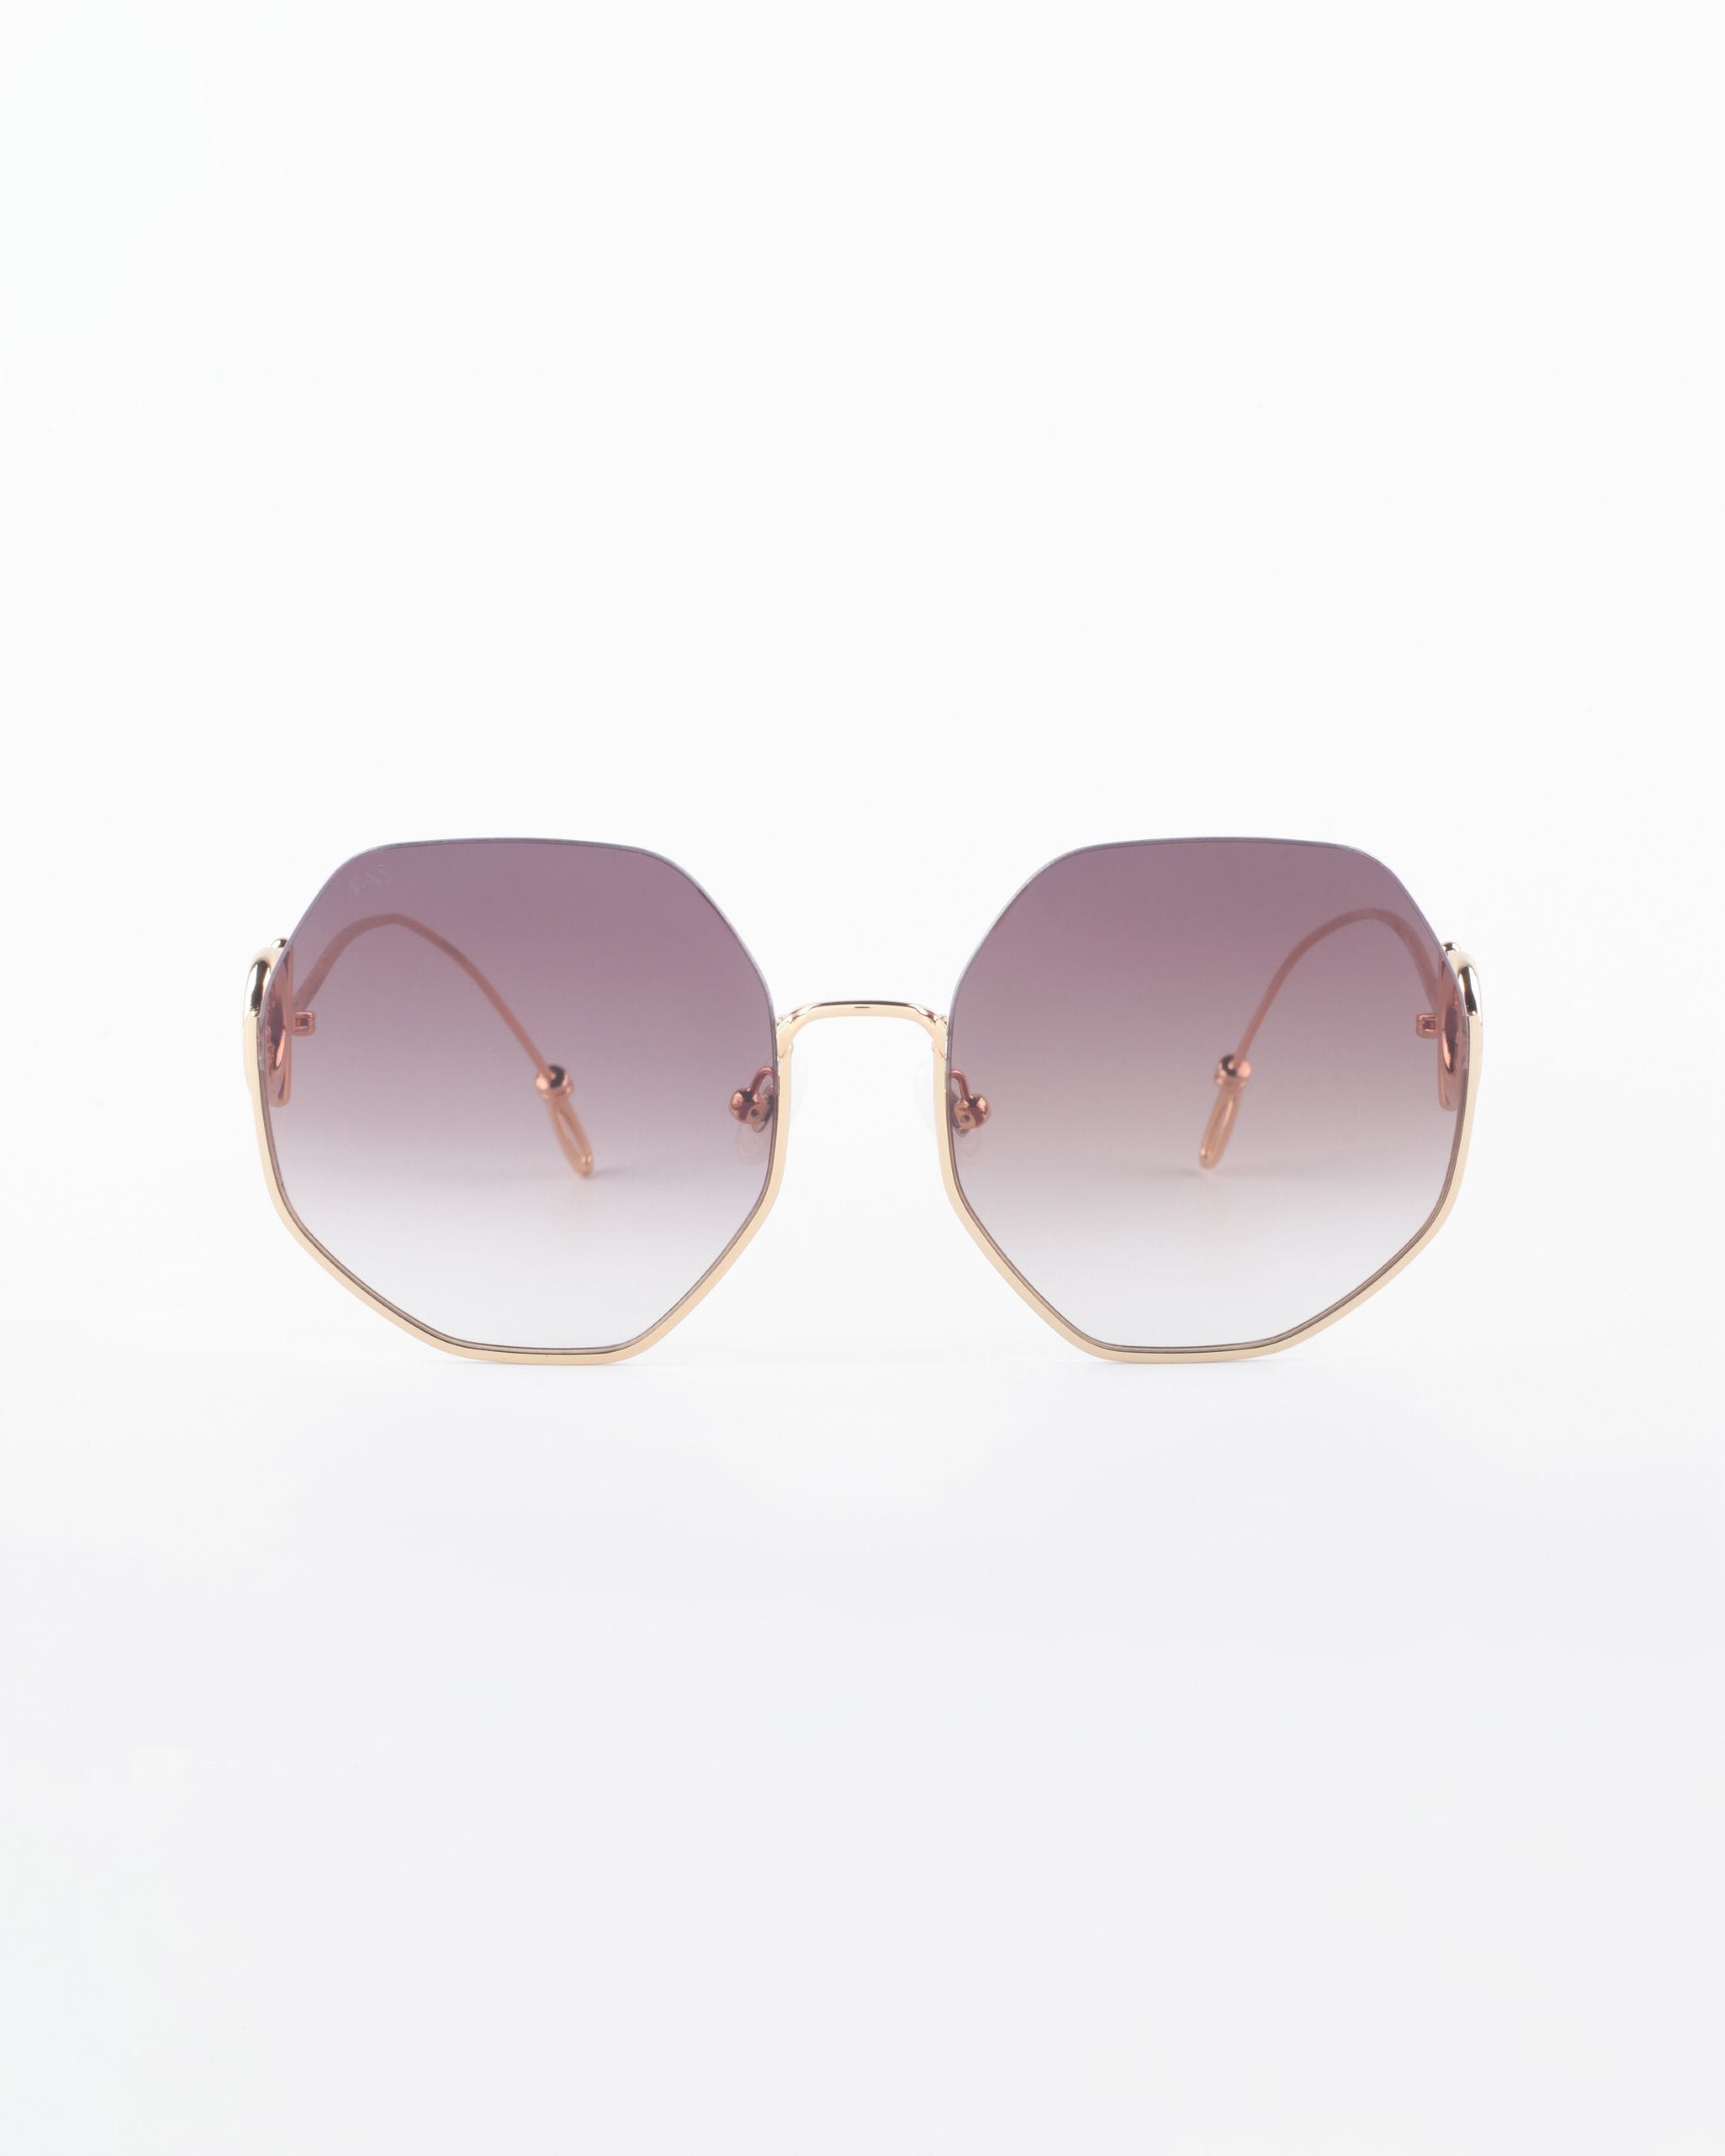 The For Art&#39;s Sake® Palace is a pair of sunglasses with geometric, octagonal-shaped lenses. The lenses are gradient, fading from dark purple at the top to lighter hues at the bottom. Featuring thin, gold-colored frames and arms, they are also UVA &amp; UVB-protected for optimal eye safety.